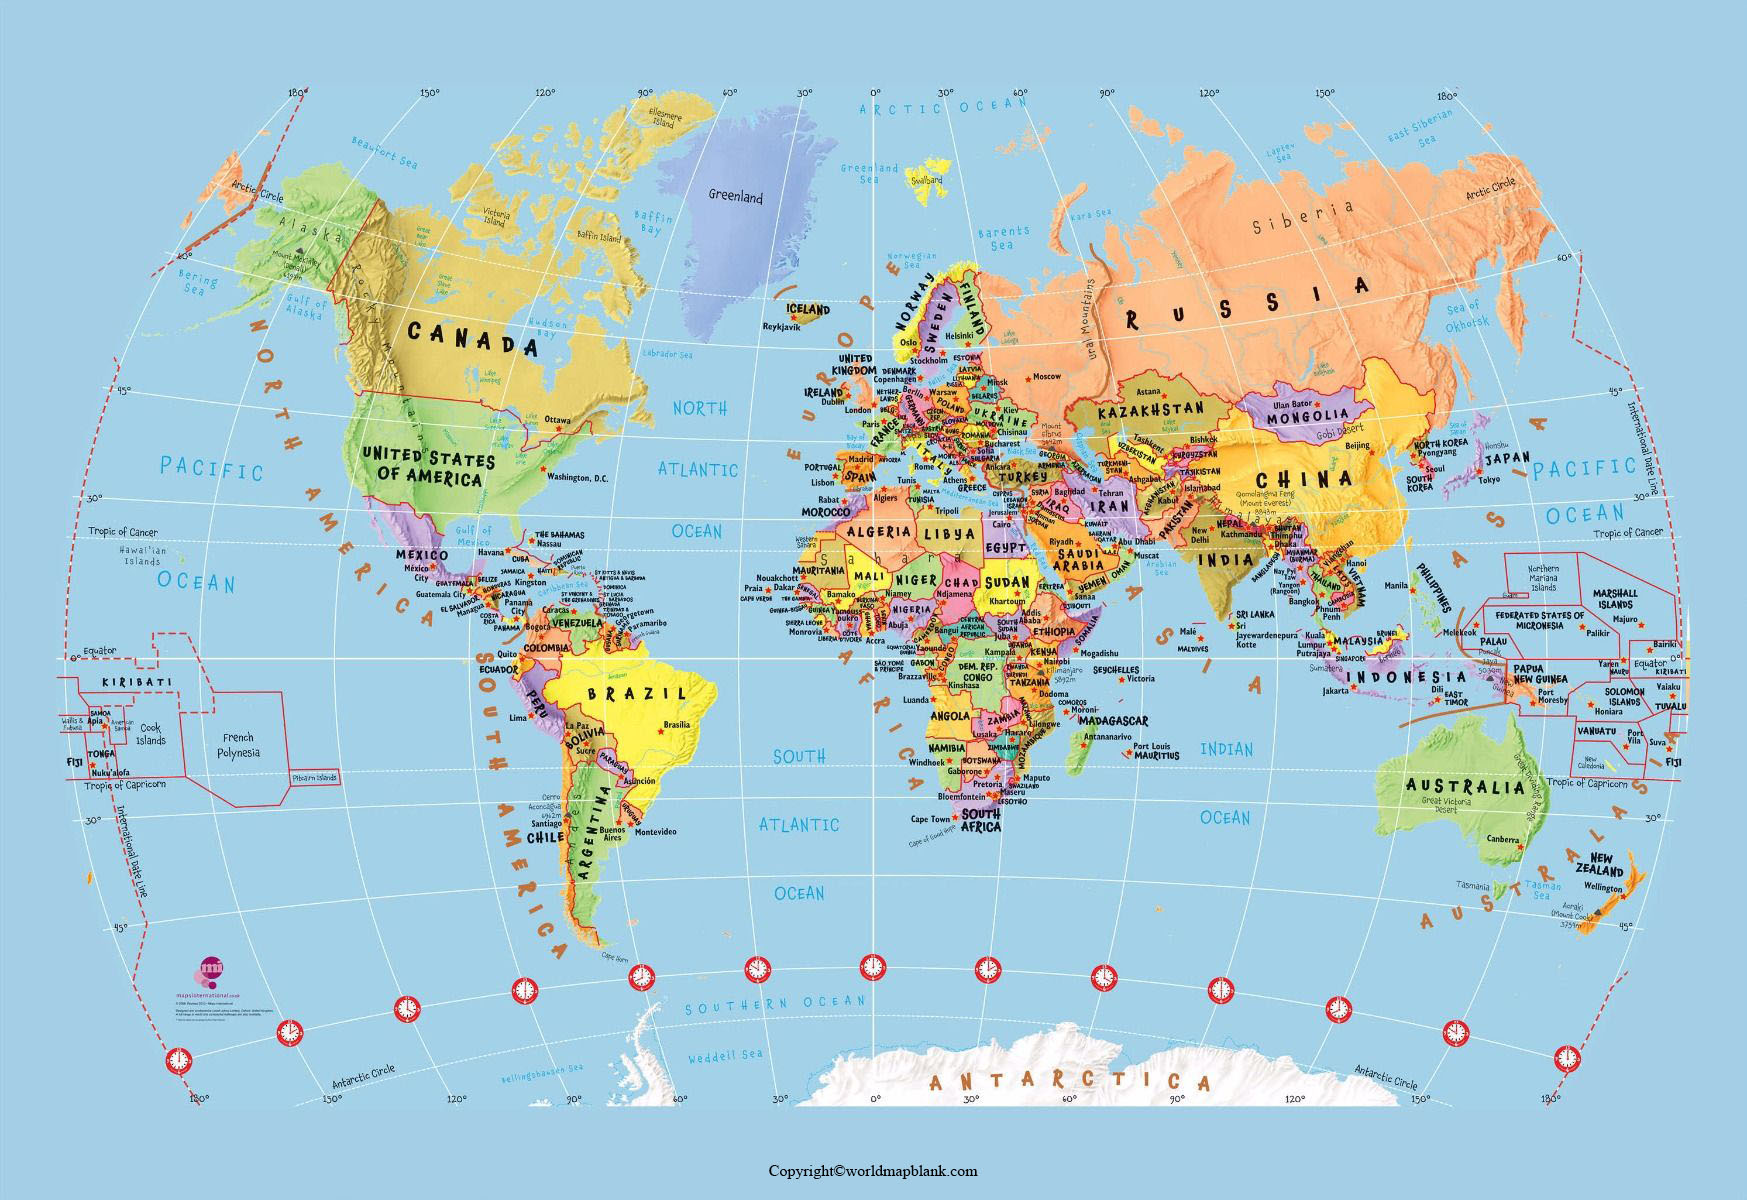 World Map with Continents, Countries, and Oceans